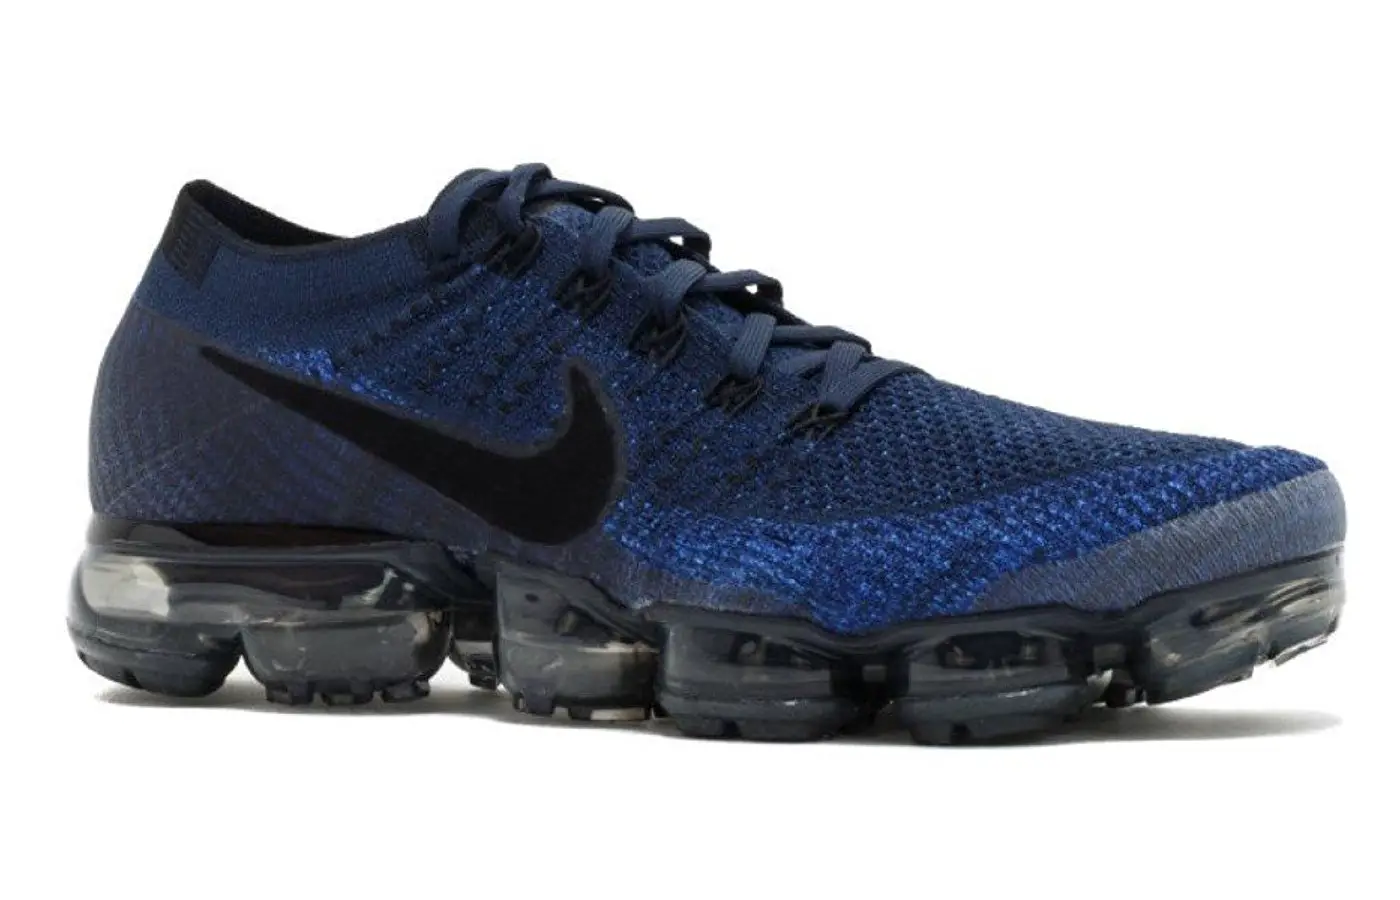 Nike Air Vapormax Flyknit Reviewed for Performance in 2018 | TheGearHunt